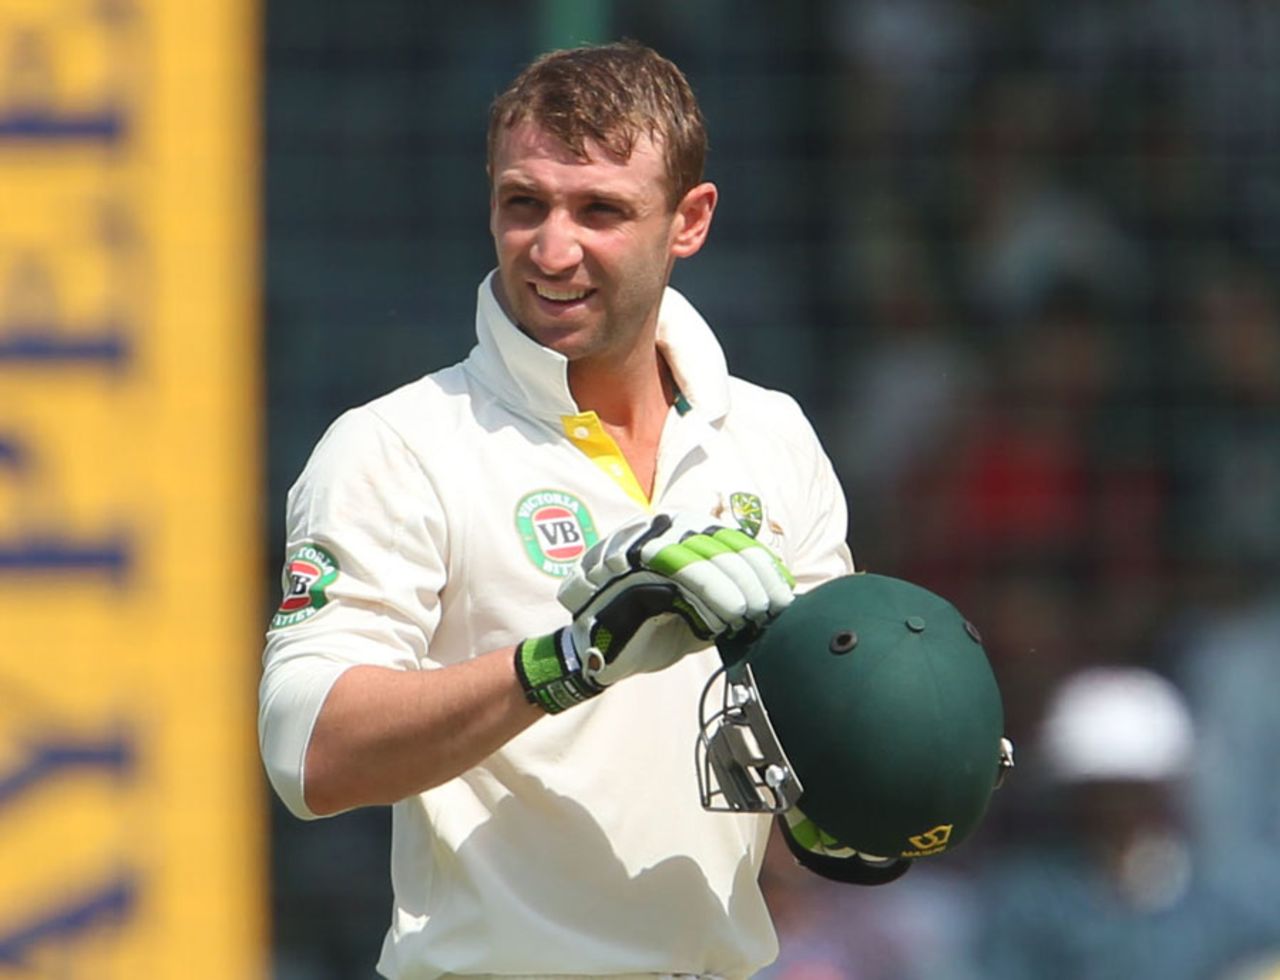 Phillip Hughes checks his helmet after being struck by a bouncer, India v Australia, 4th Test, Delhi, 1st day, March 22, 2013